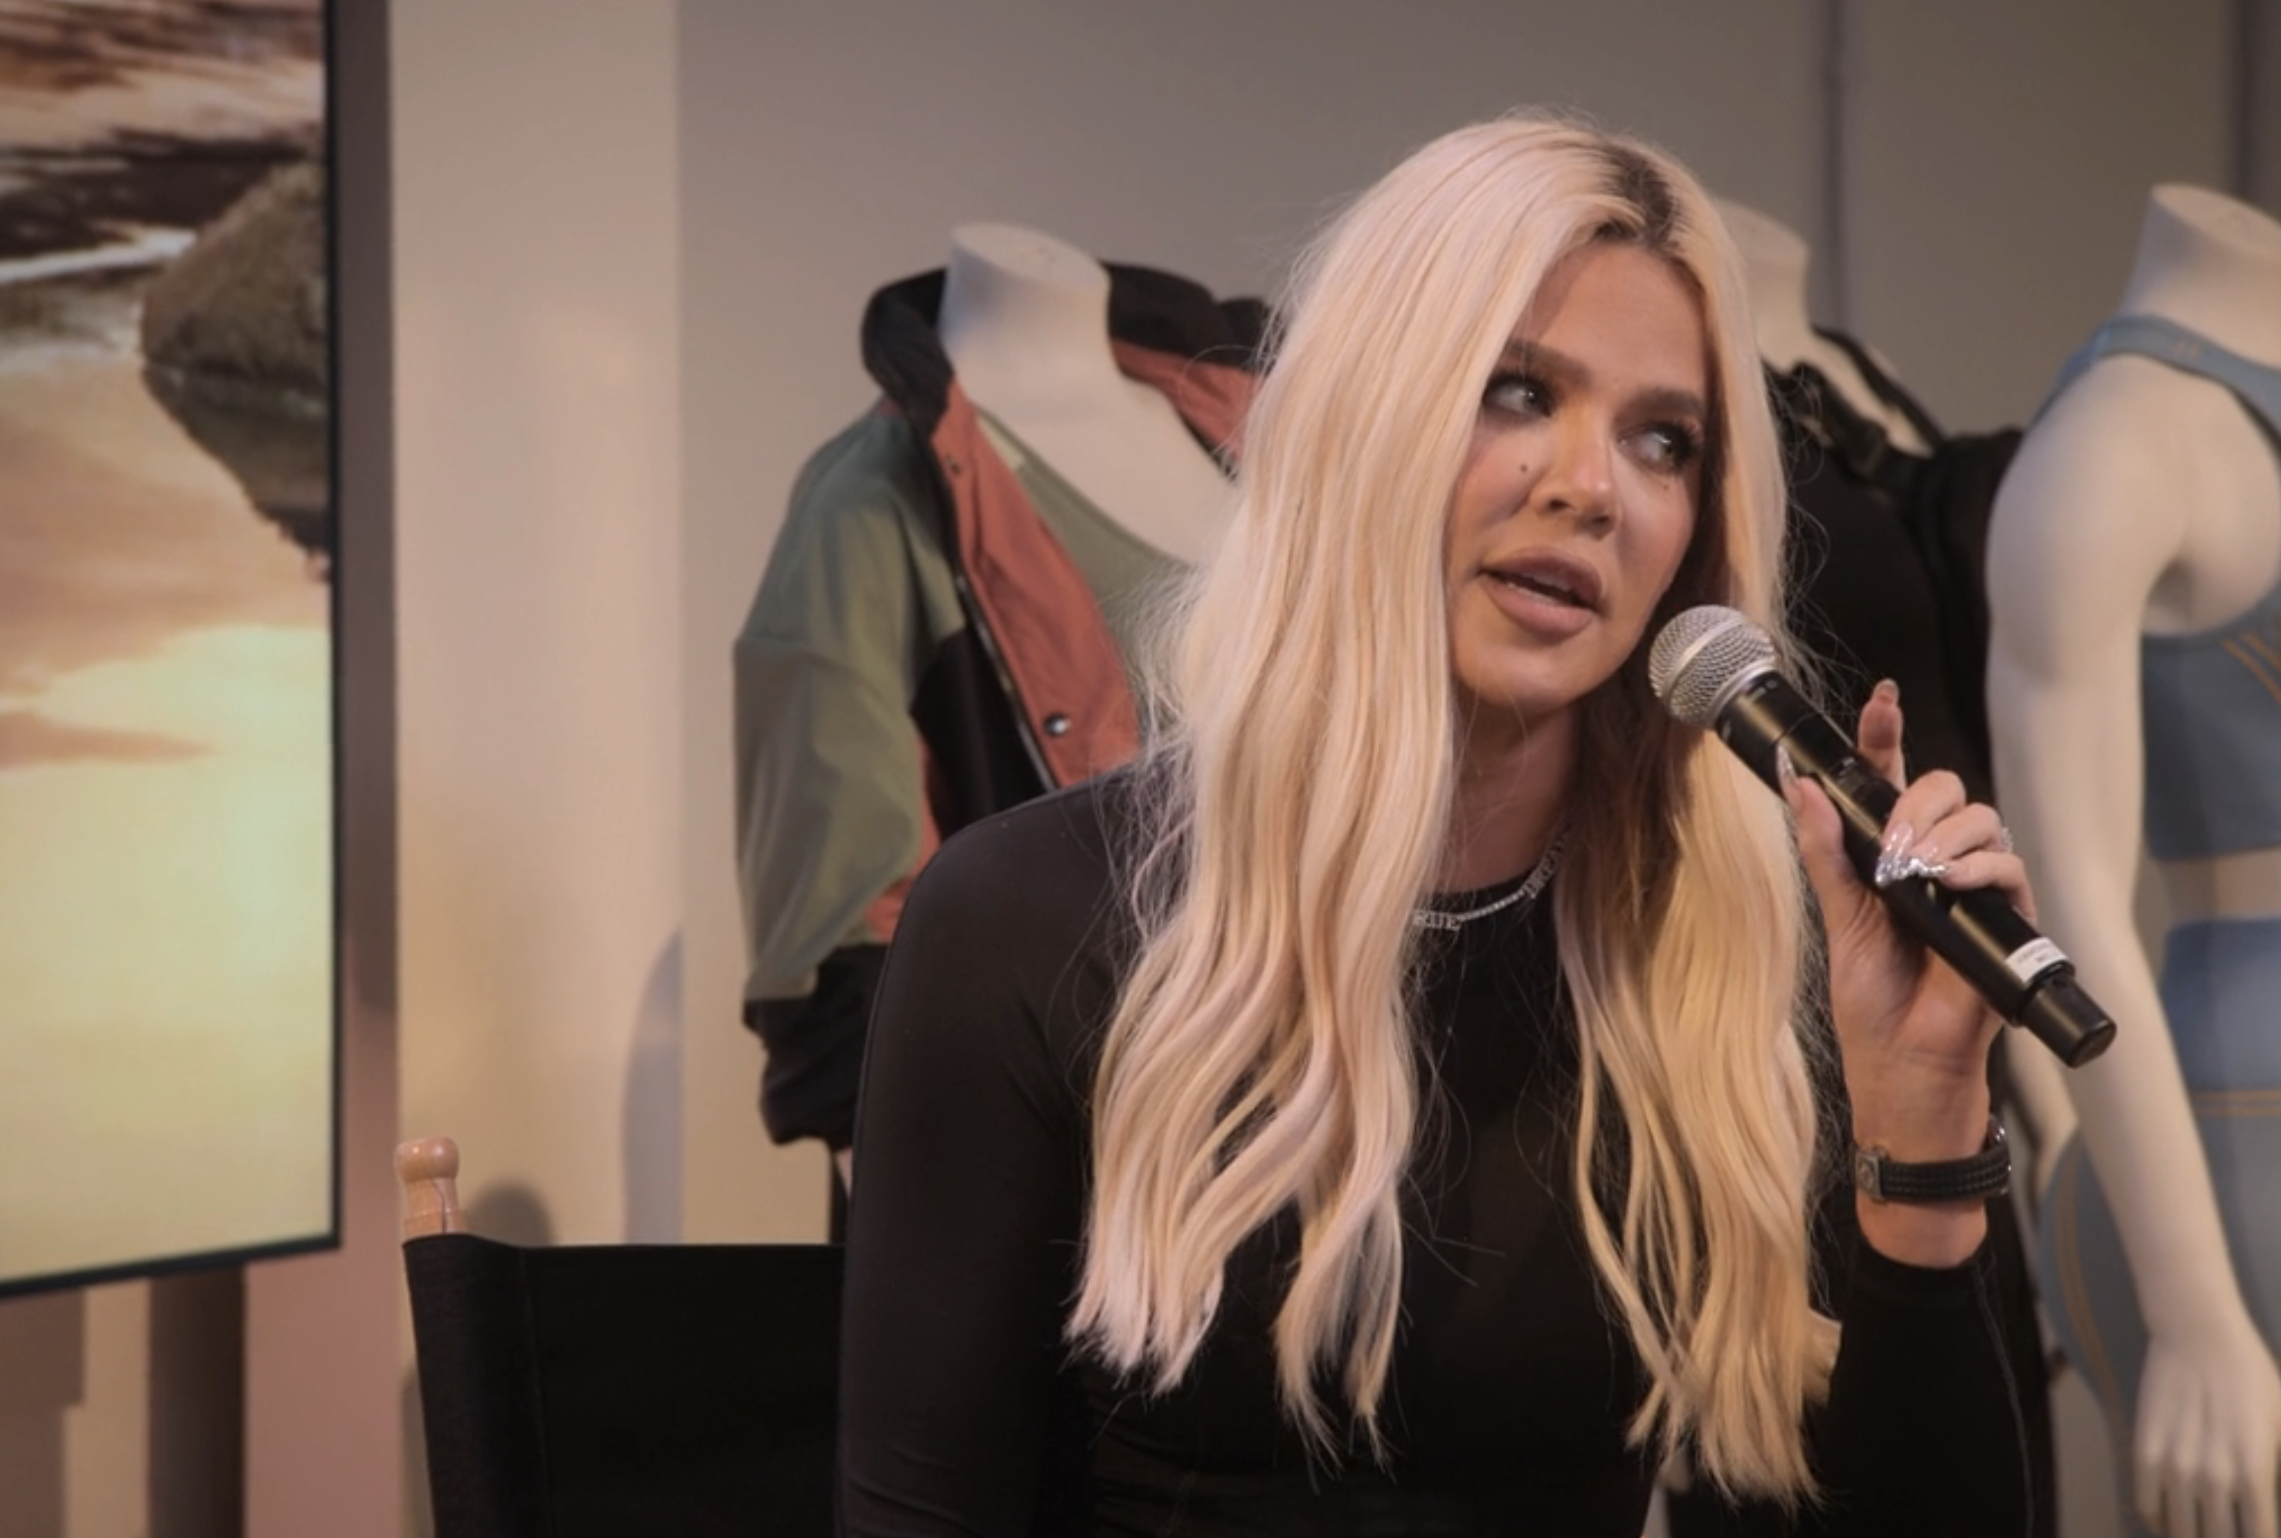 Khloé Kardashian is sitting and speaking into a microphone. Mannequins in athletic wear are behind her. A large photo print is visible to the left